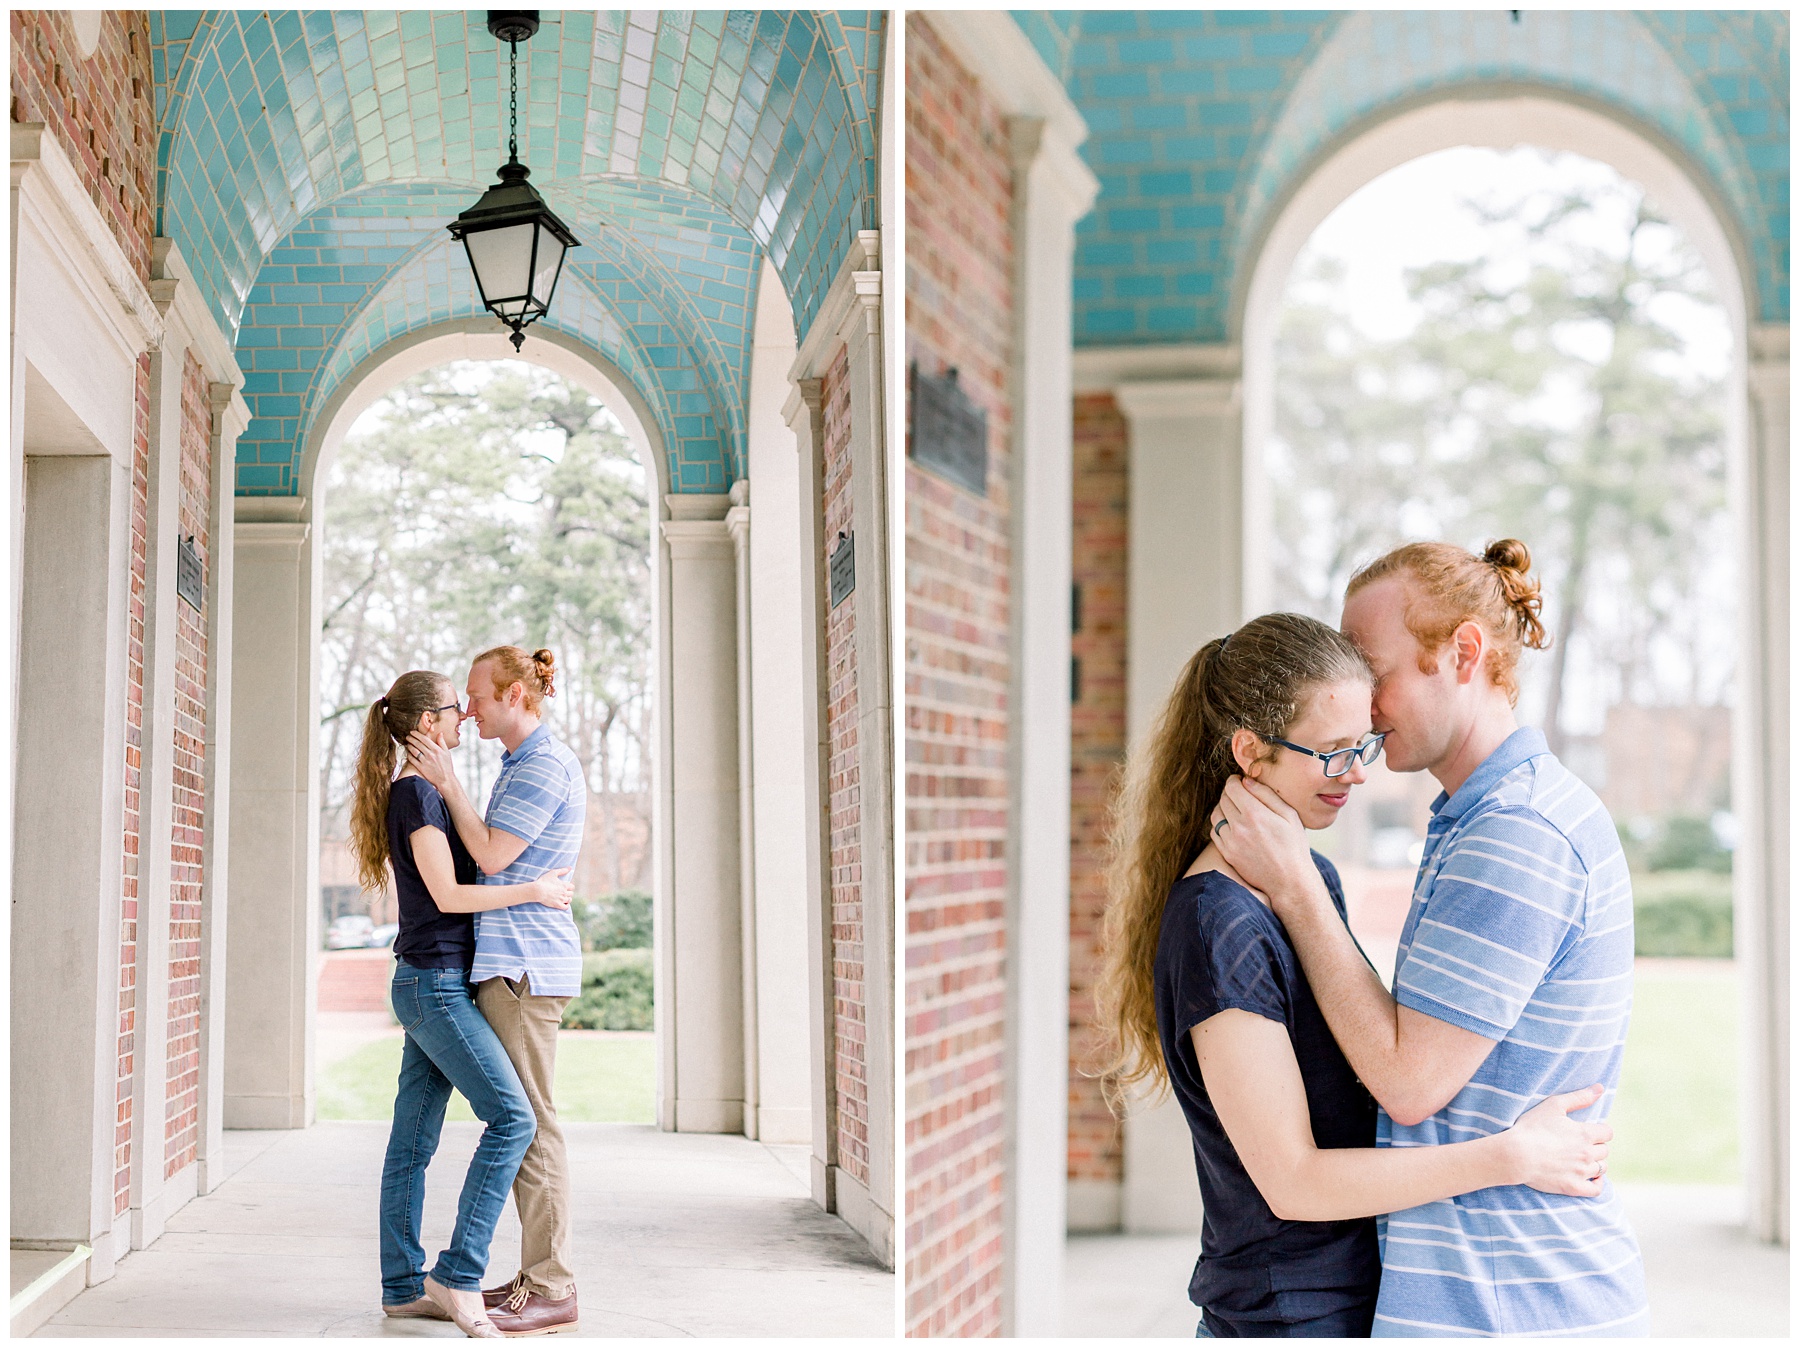 Spring Engagement Session at UNC Chapel Hill. North Carolina Wedding Photographer. UNC Bell Tower